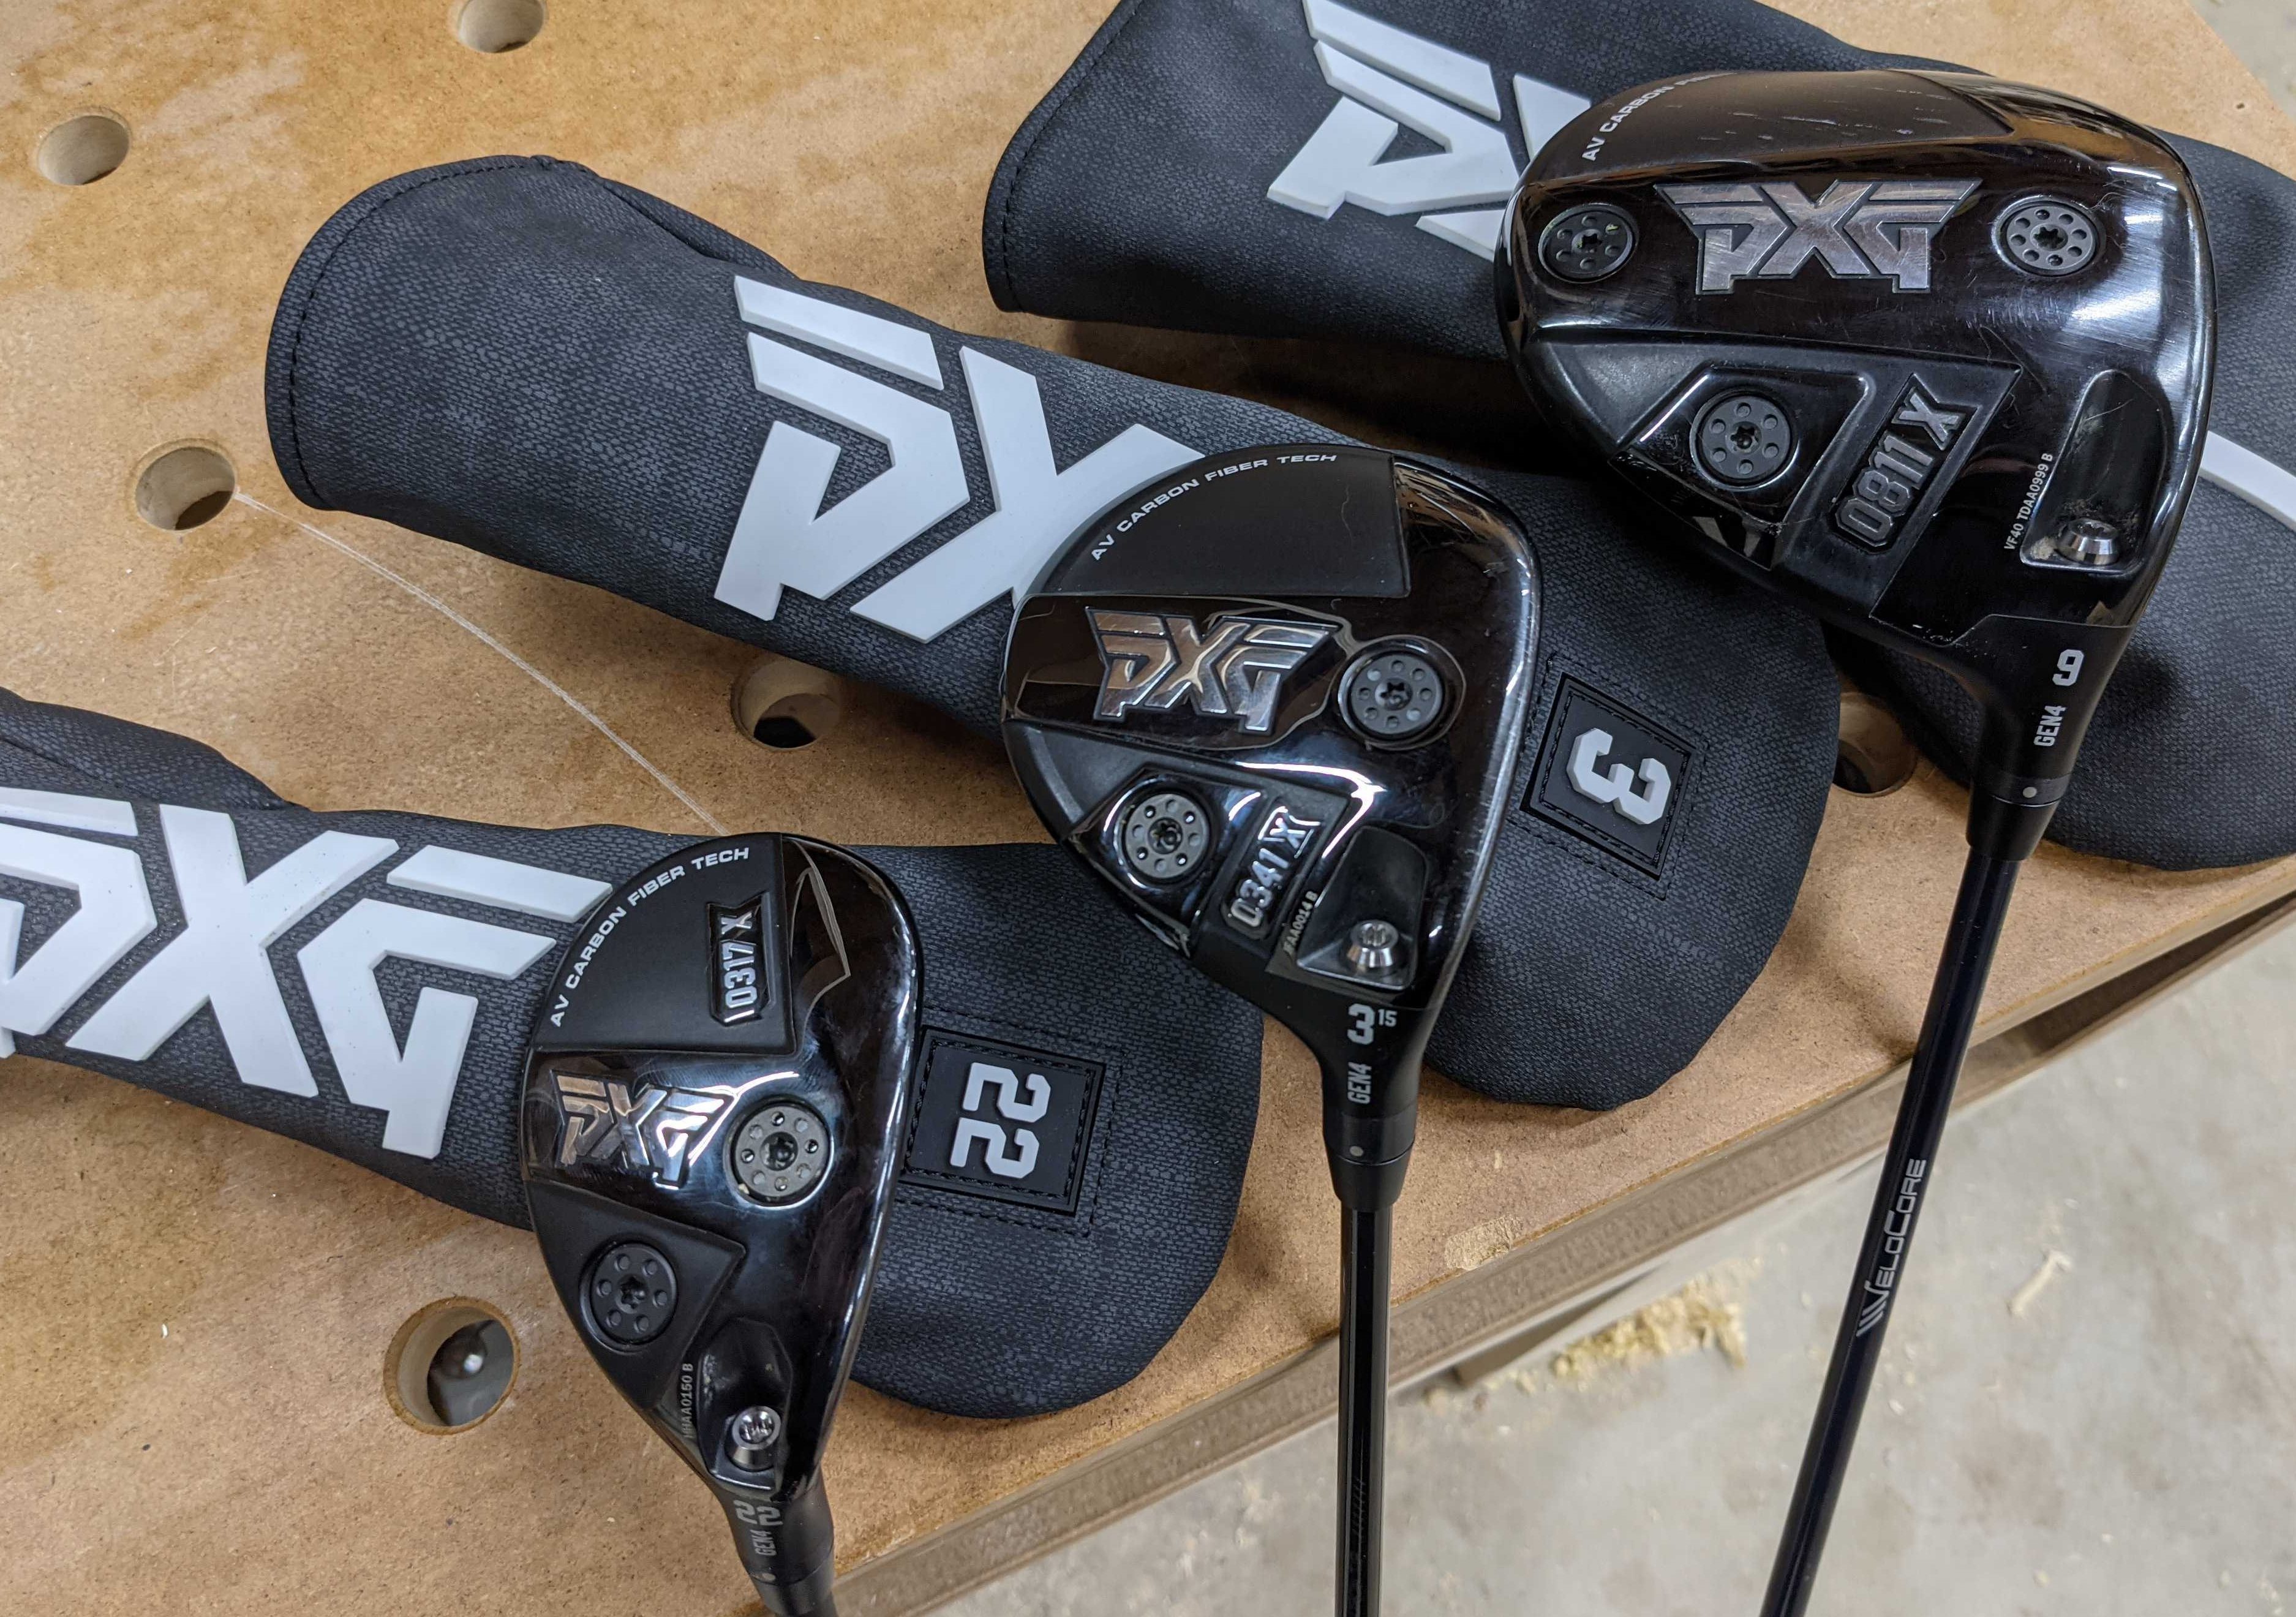 2021 PXG Gen4 drivers and fairway woods: More technology, greater